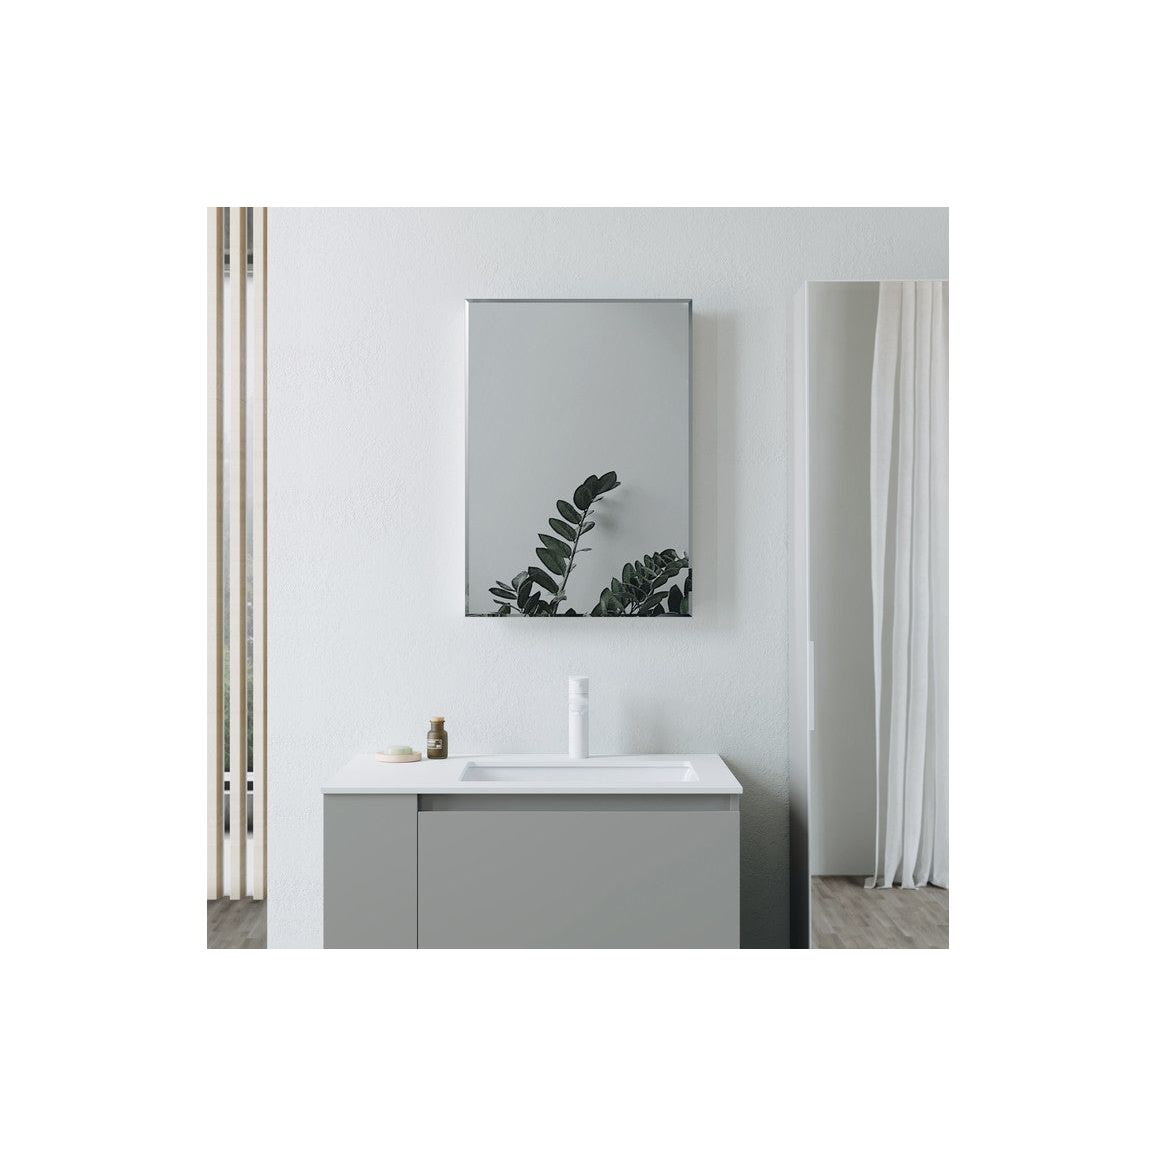 Sibut 600x800mm Rectangle Mirror